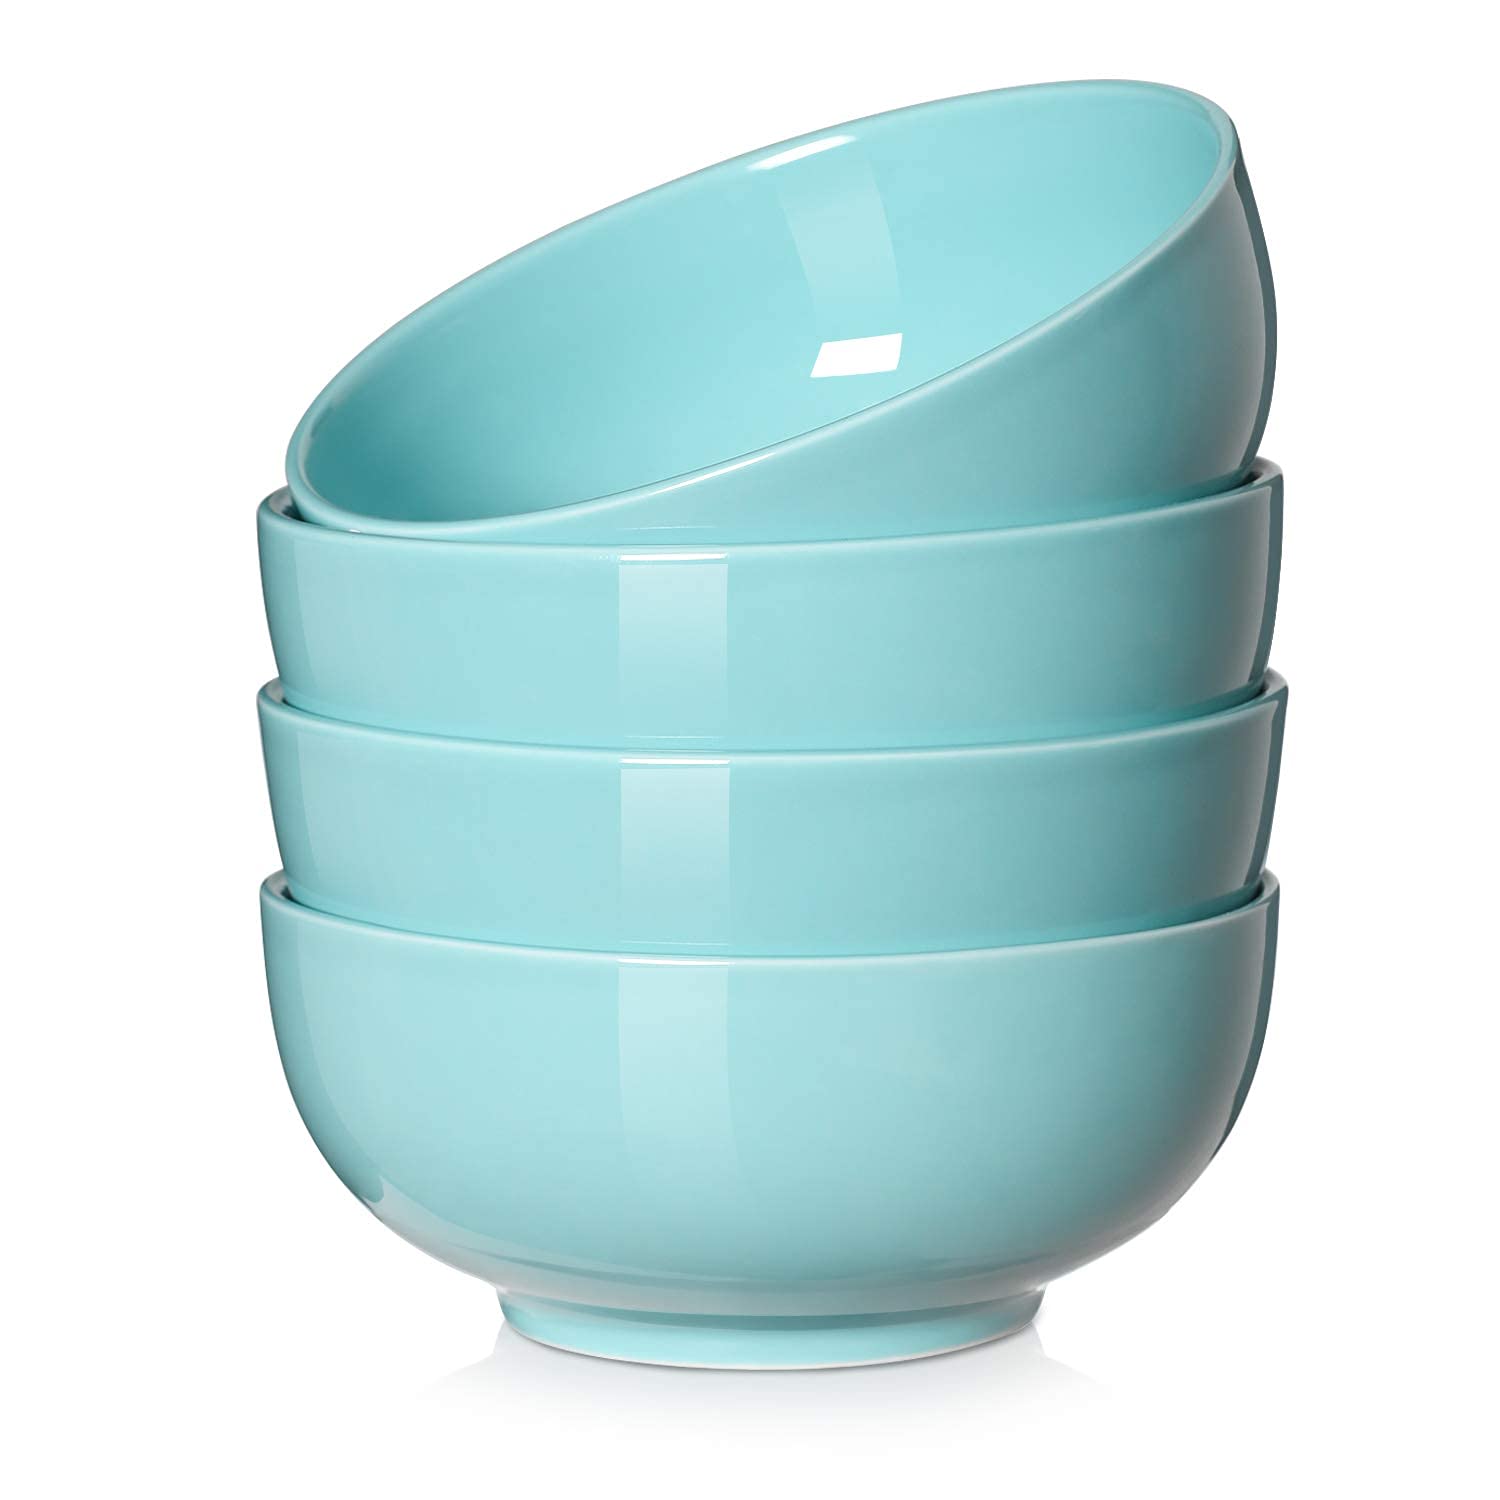 DOWAN 22 Ounces Porcelain Cereal Bowls, Soup Bowls, Bowl Set of 4,Sturdy and Stackable, Dishwasher Microwave Safe, White Bowls for Rice Pasta Salad Oatmeal, Turquoise & AIRY BLUE